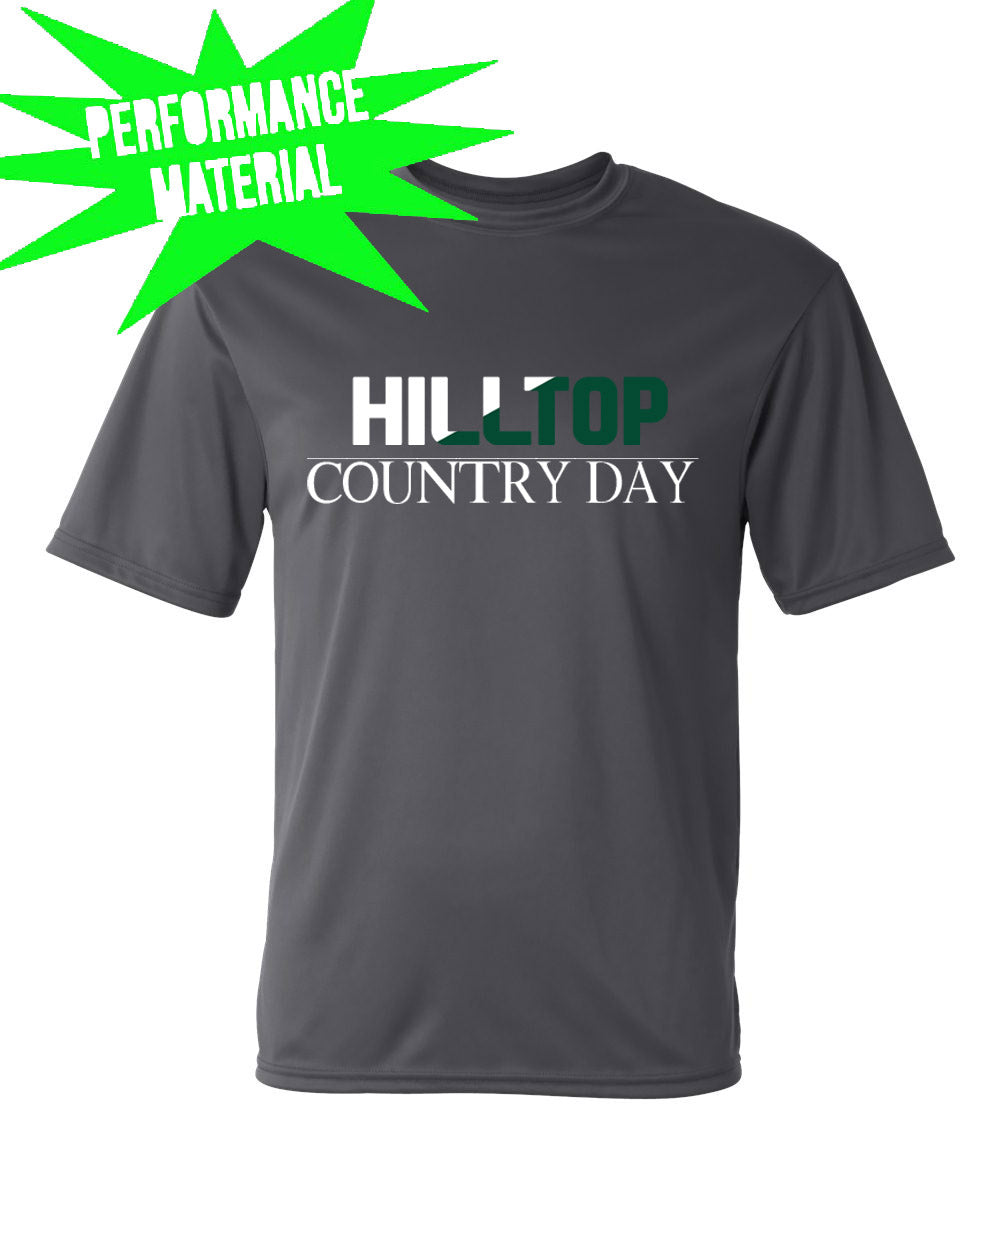 Hilltop Country Day School Performance Material design 4 T-Shirt